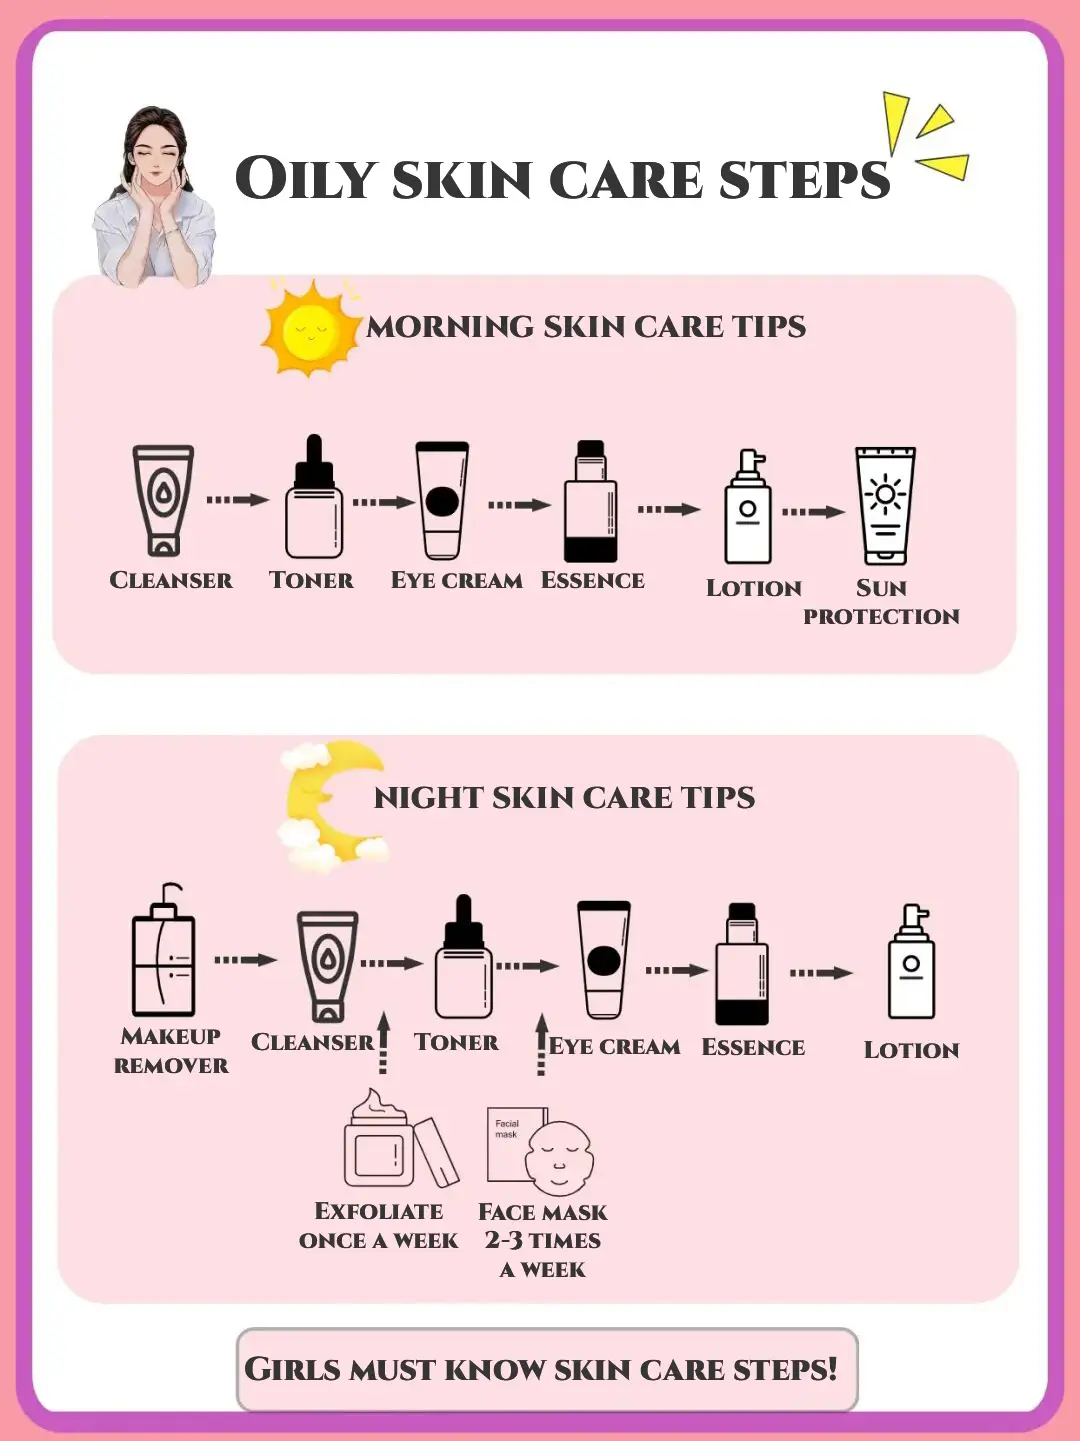 Skin care tips and sequence for various skin types's images(3)